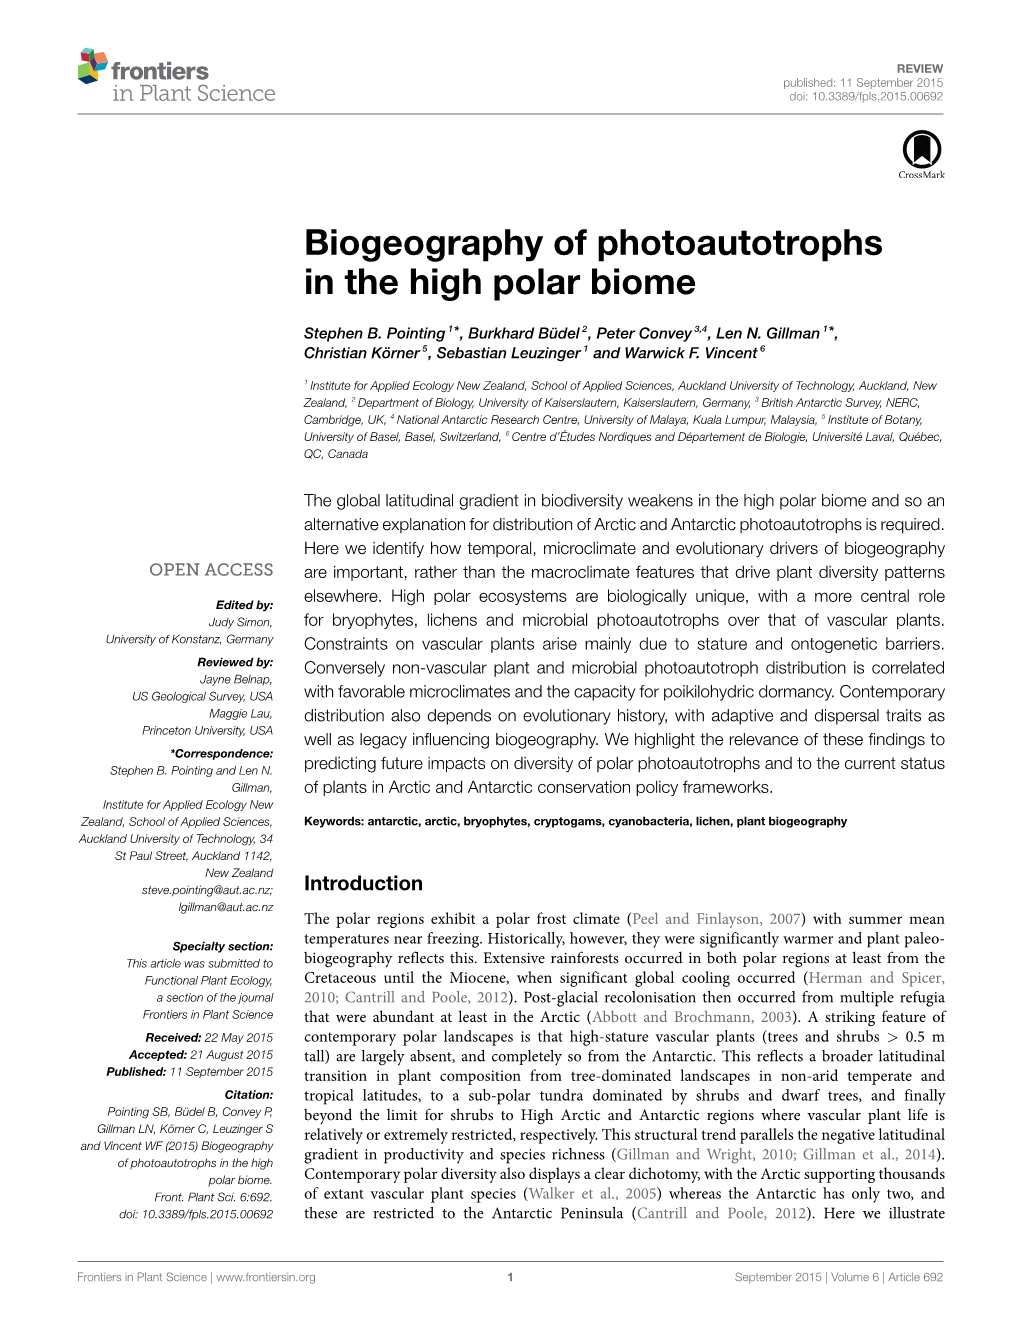 Biogeography of Photoautotrophs in the High Polar Biome